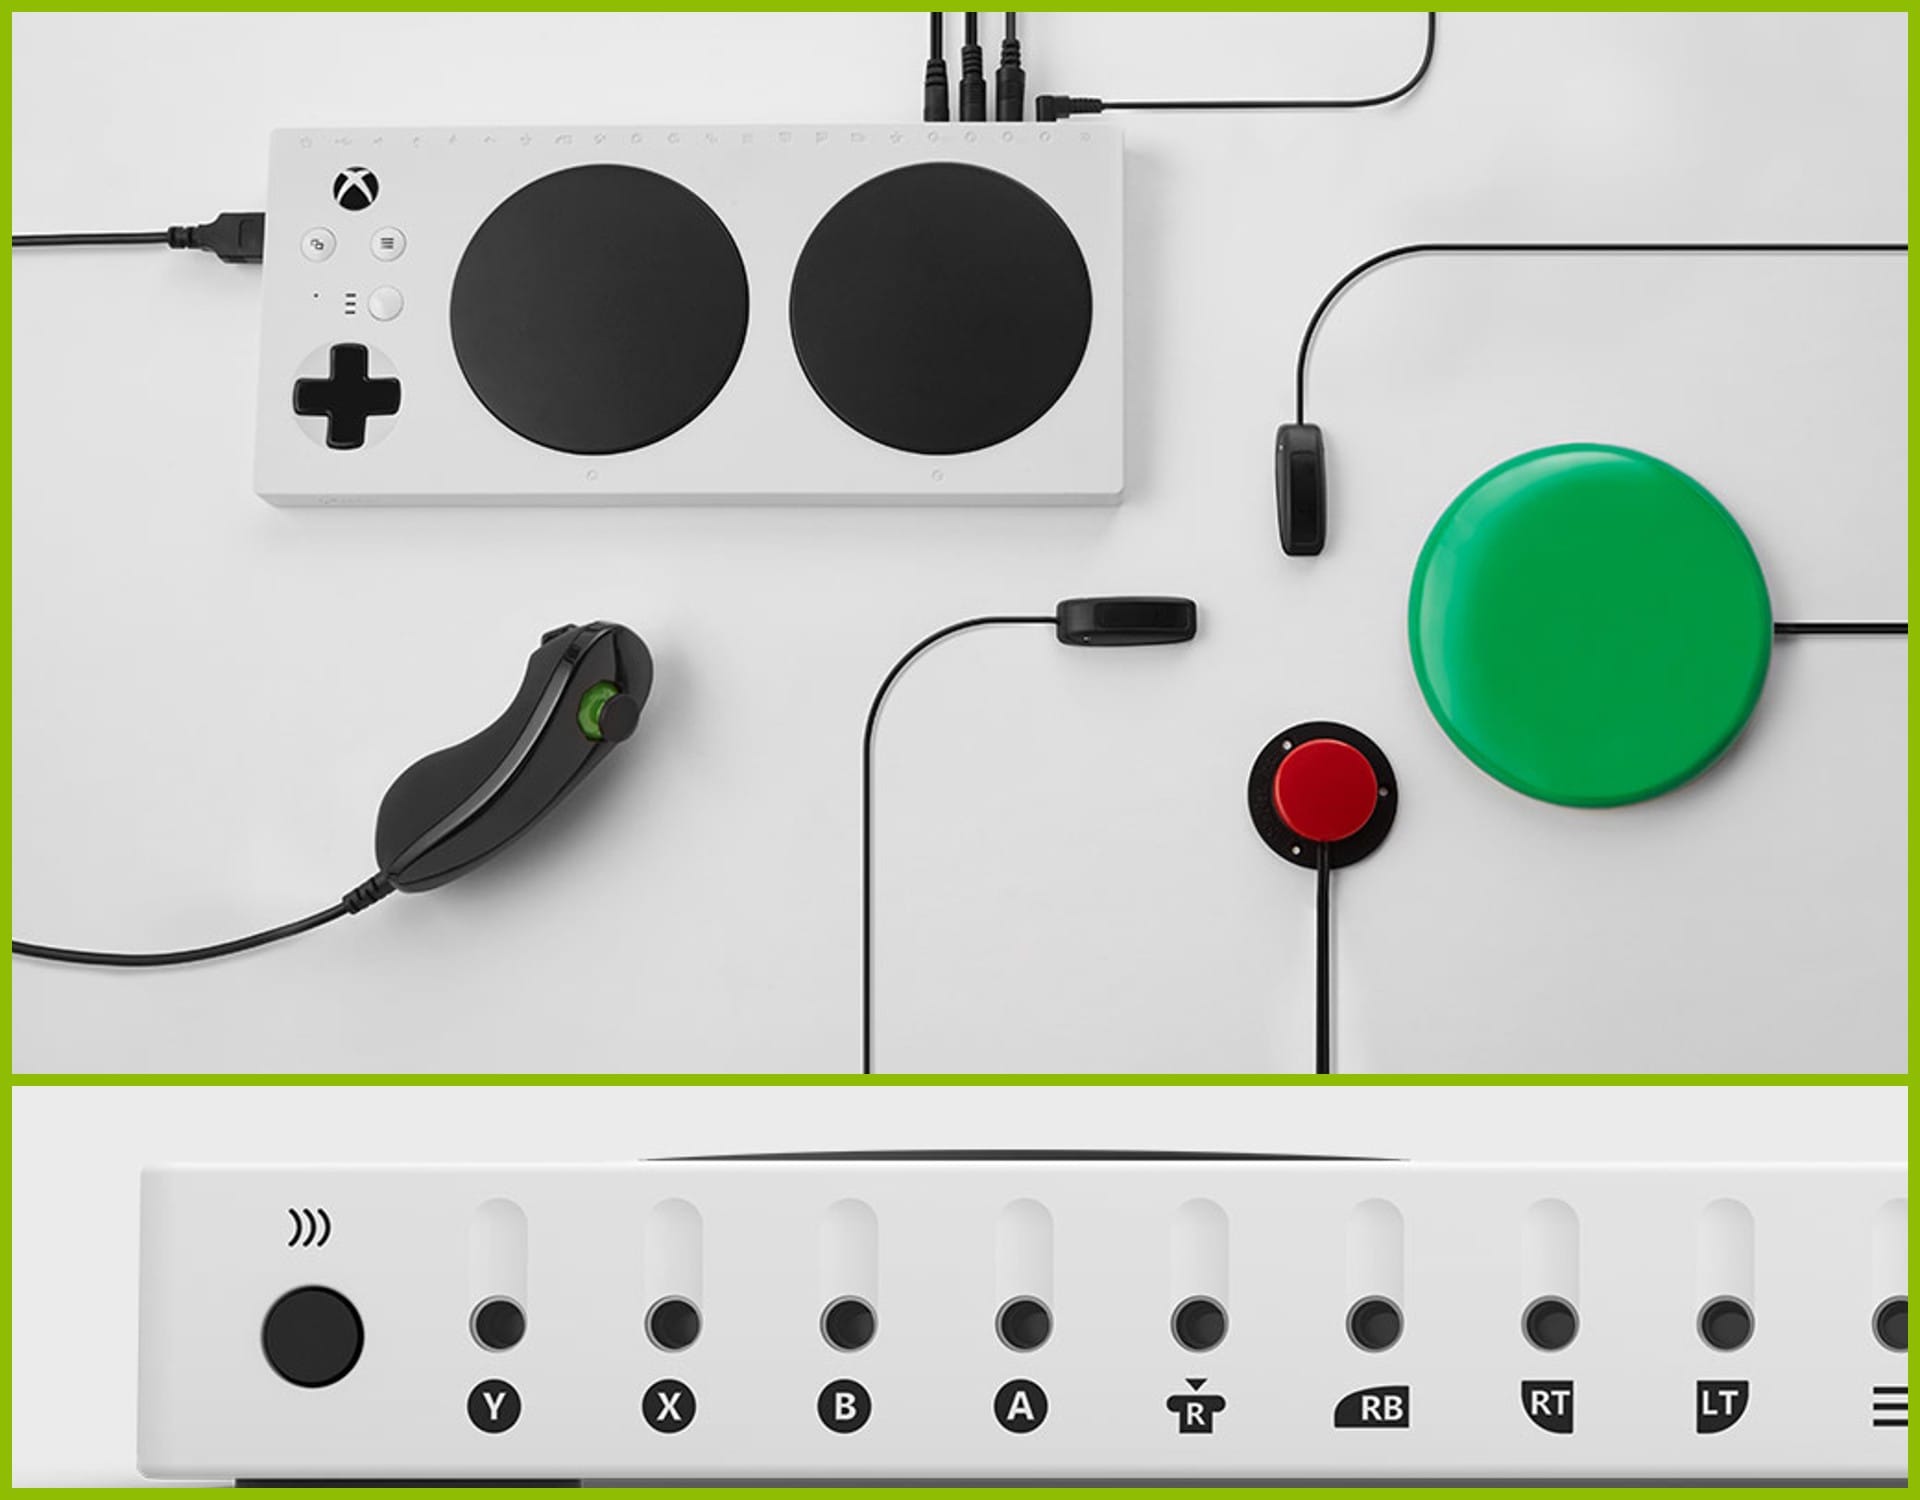 Xbox Adaptive Controller components